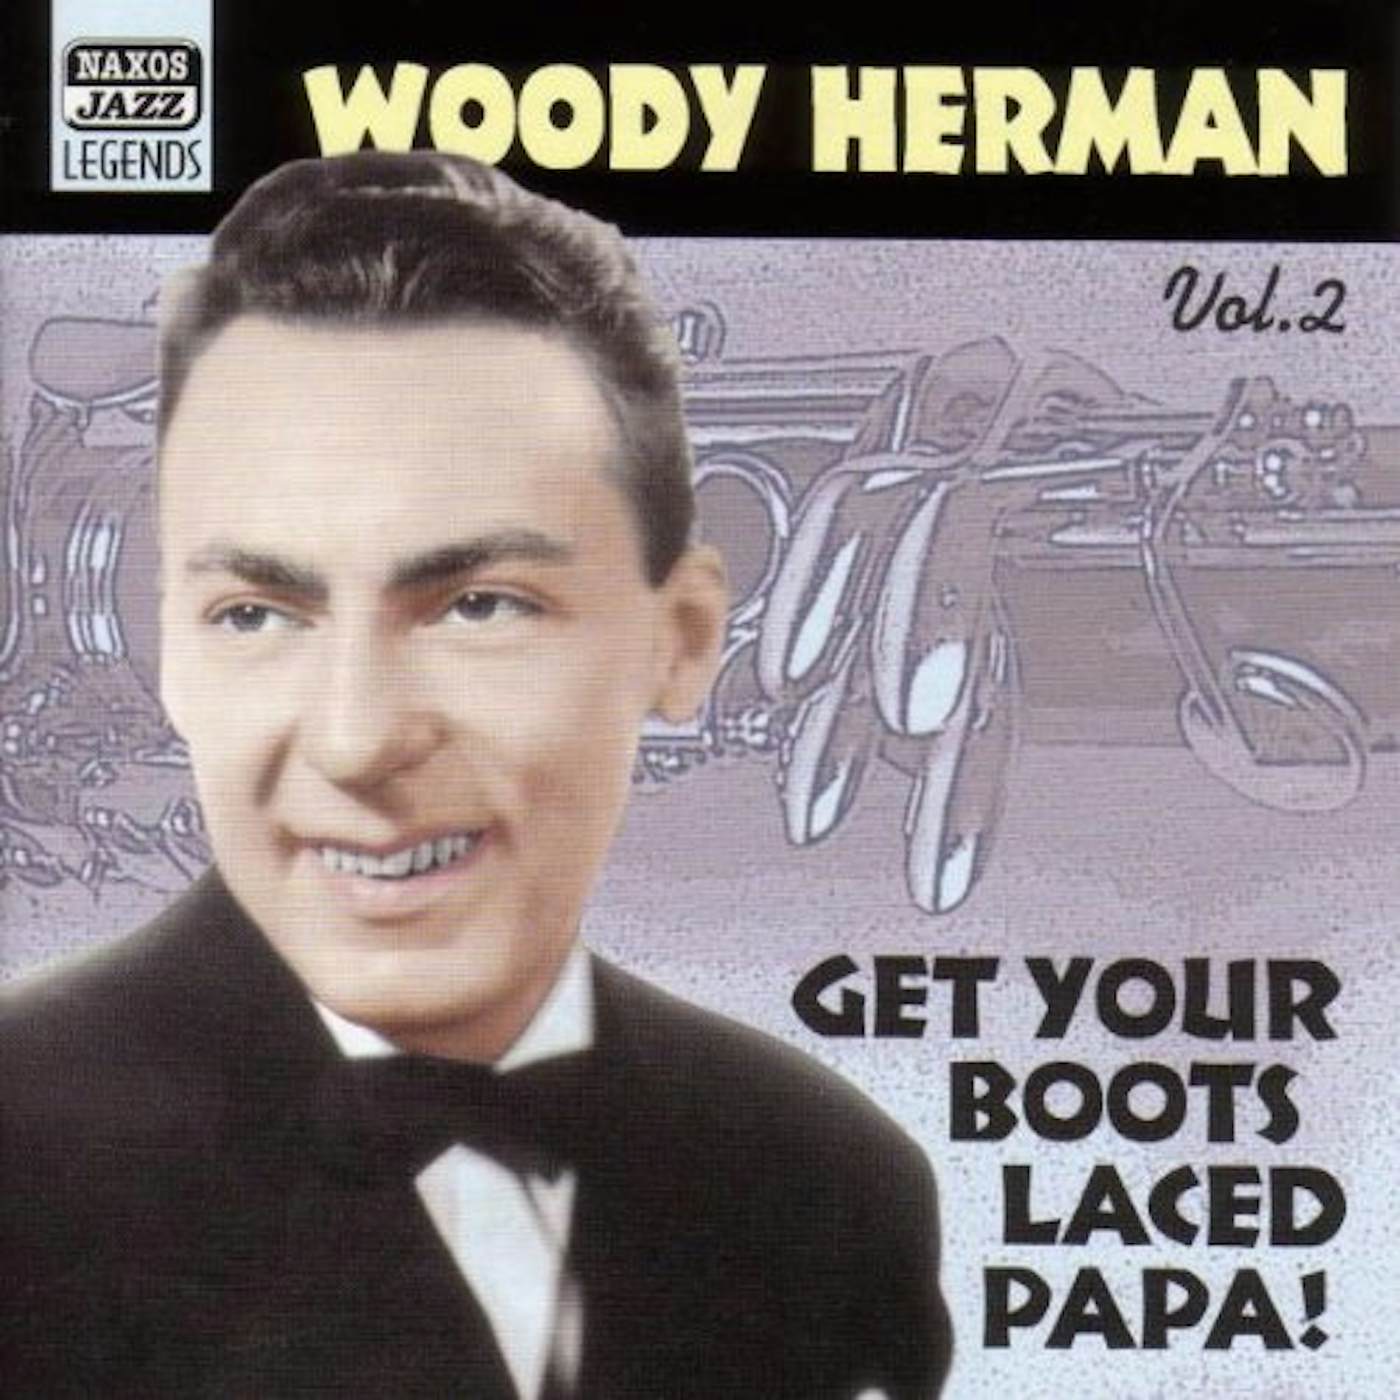 Woody Herman VOL. 2-GET YOUR BOOTS LACE PAPA CD